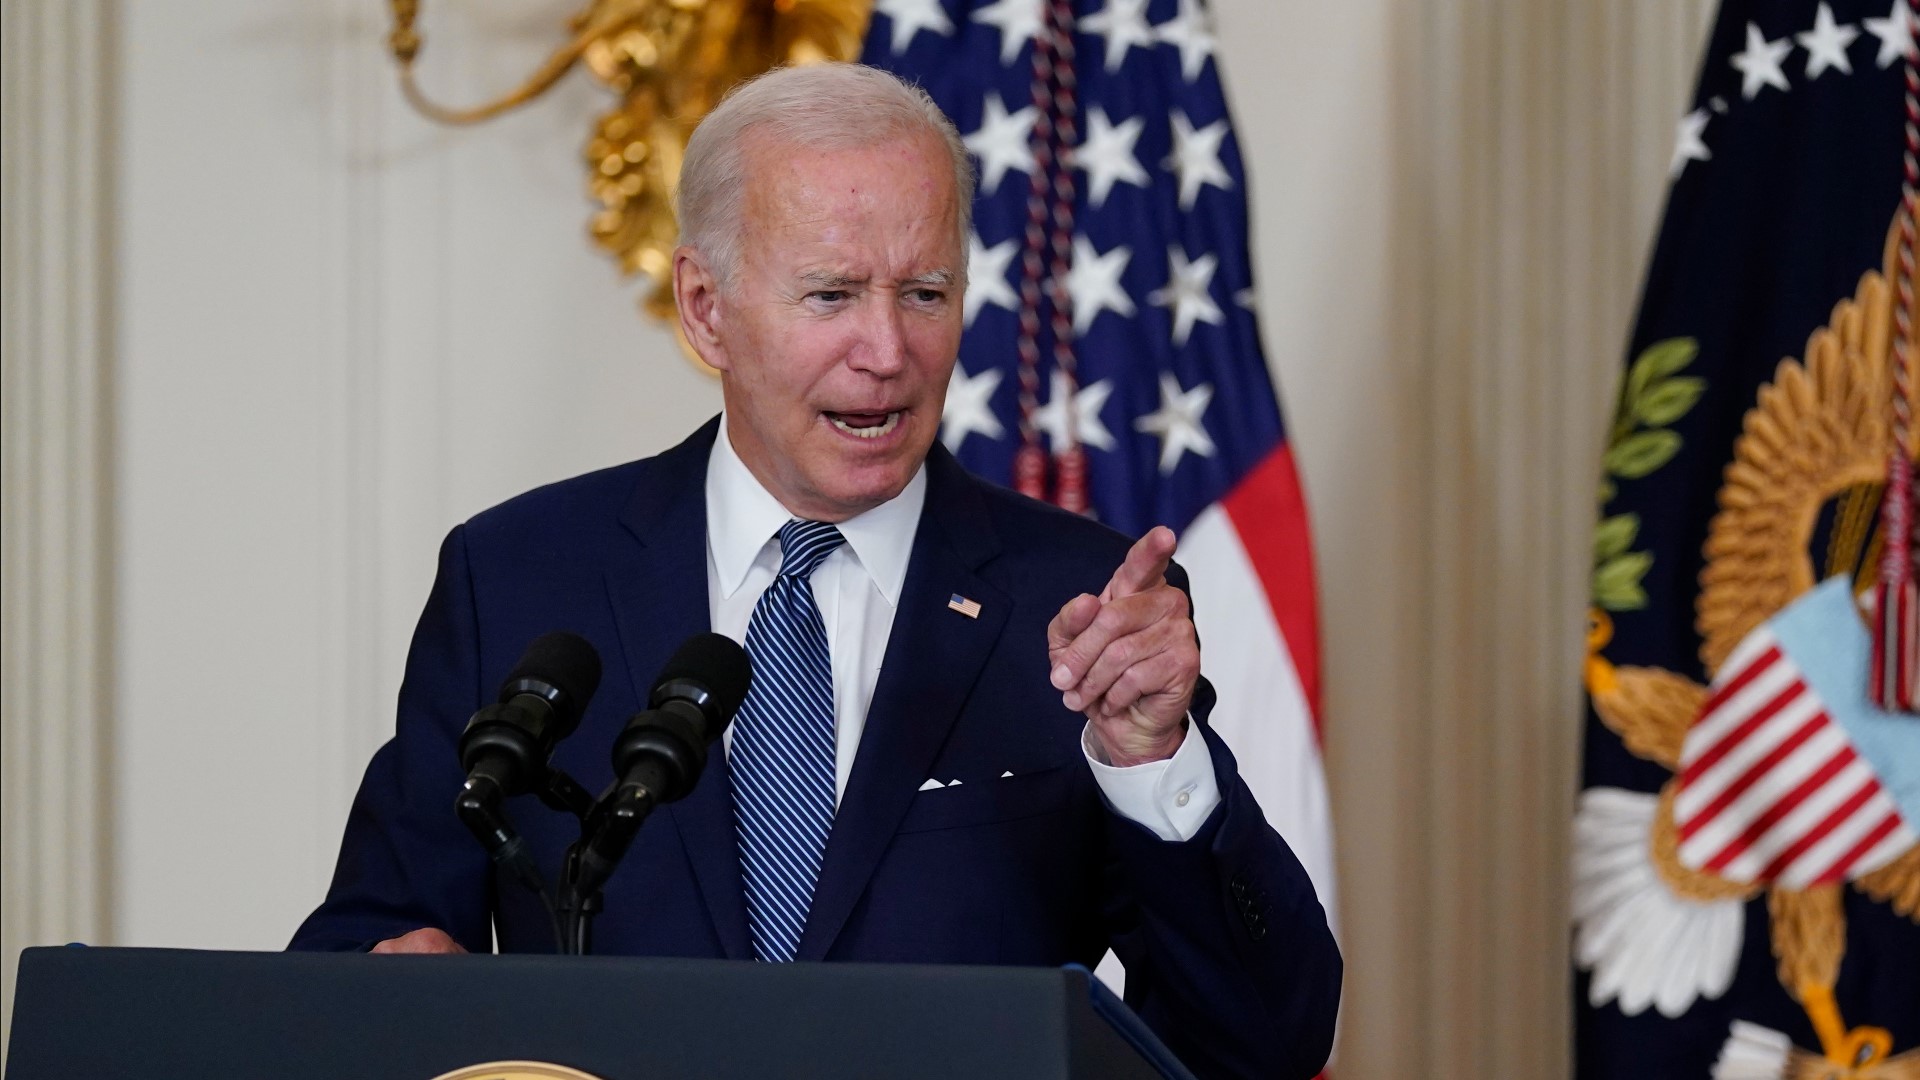 Plans are underway for a visit to Luzerne County by Pres. Biden, after an event last month, was called off.